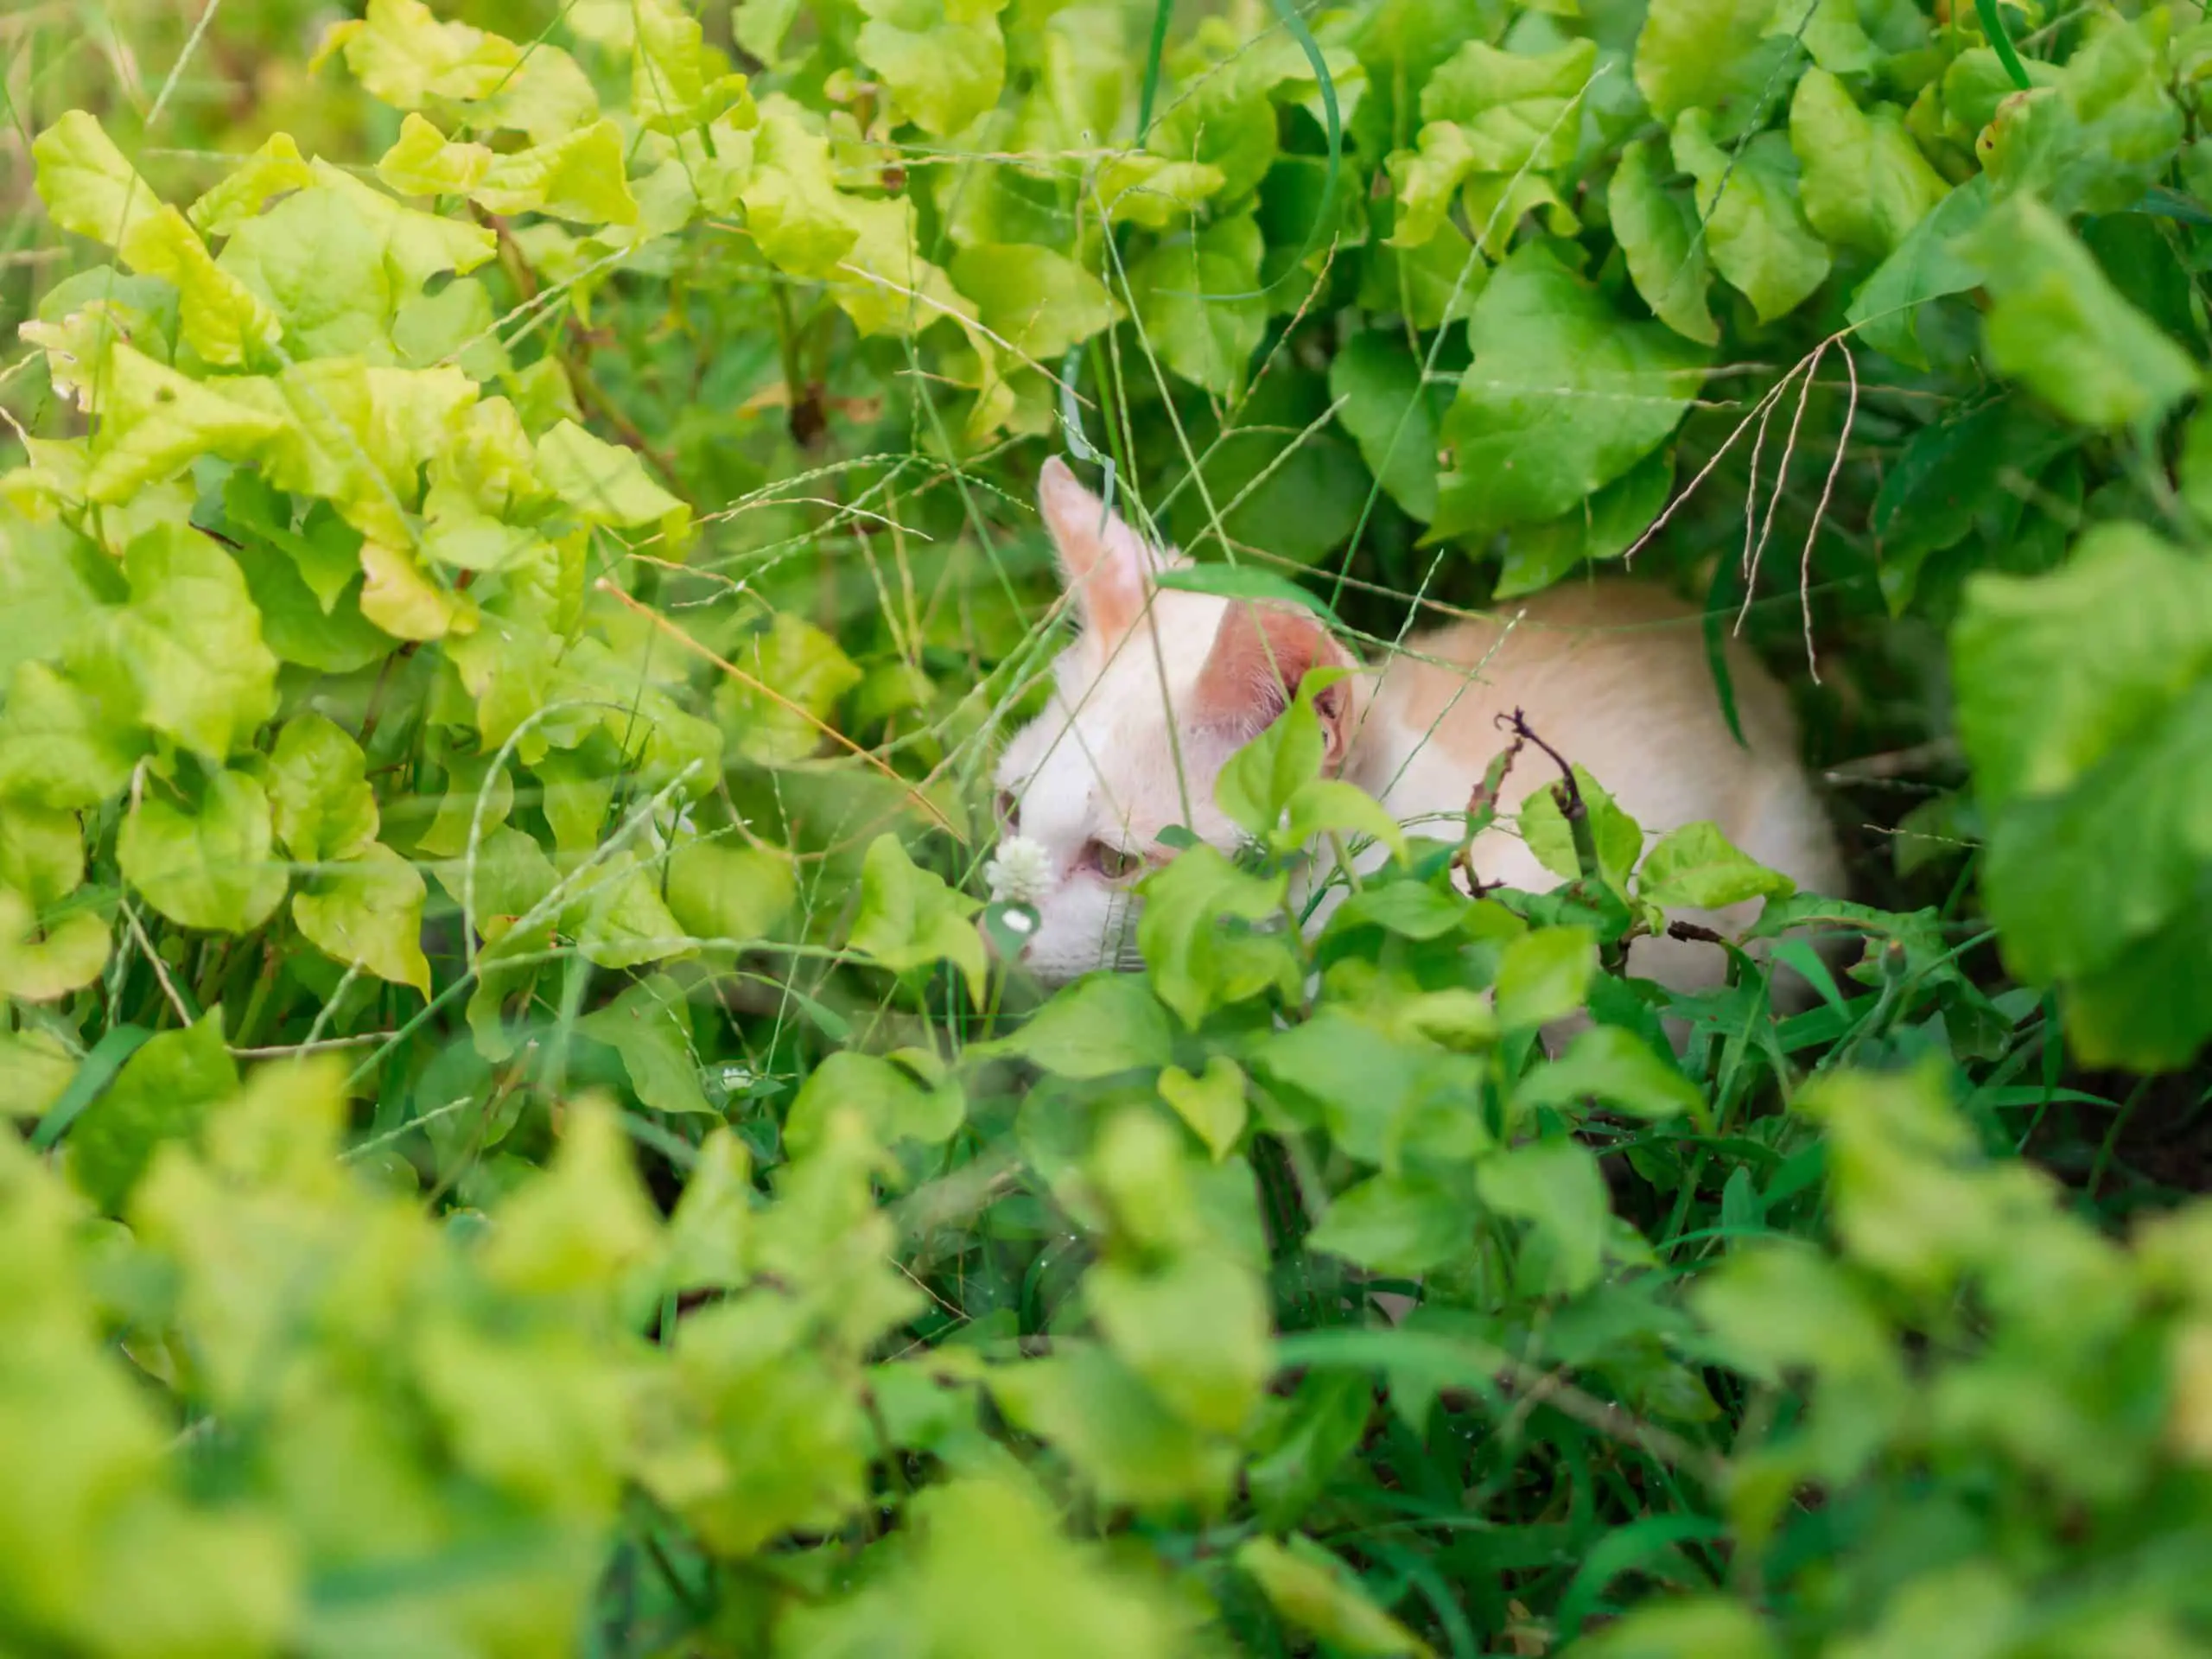 Cats make contact with weeds and plants all the time in the garden so be careful when using weed killer